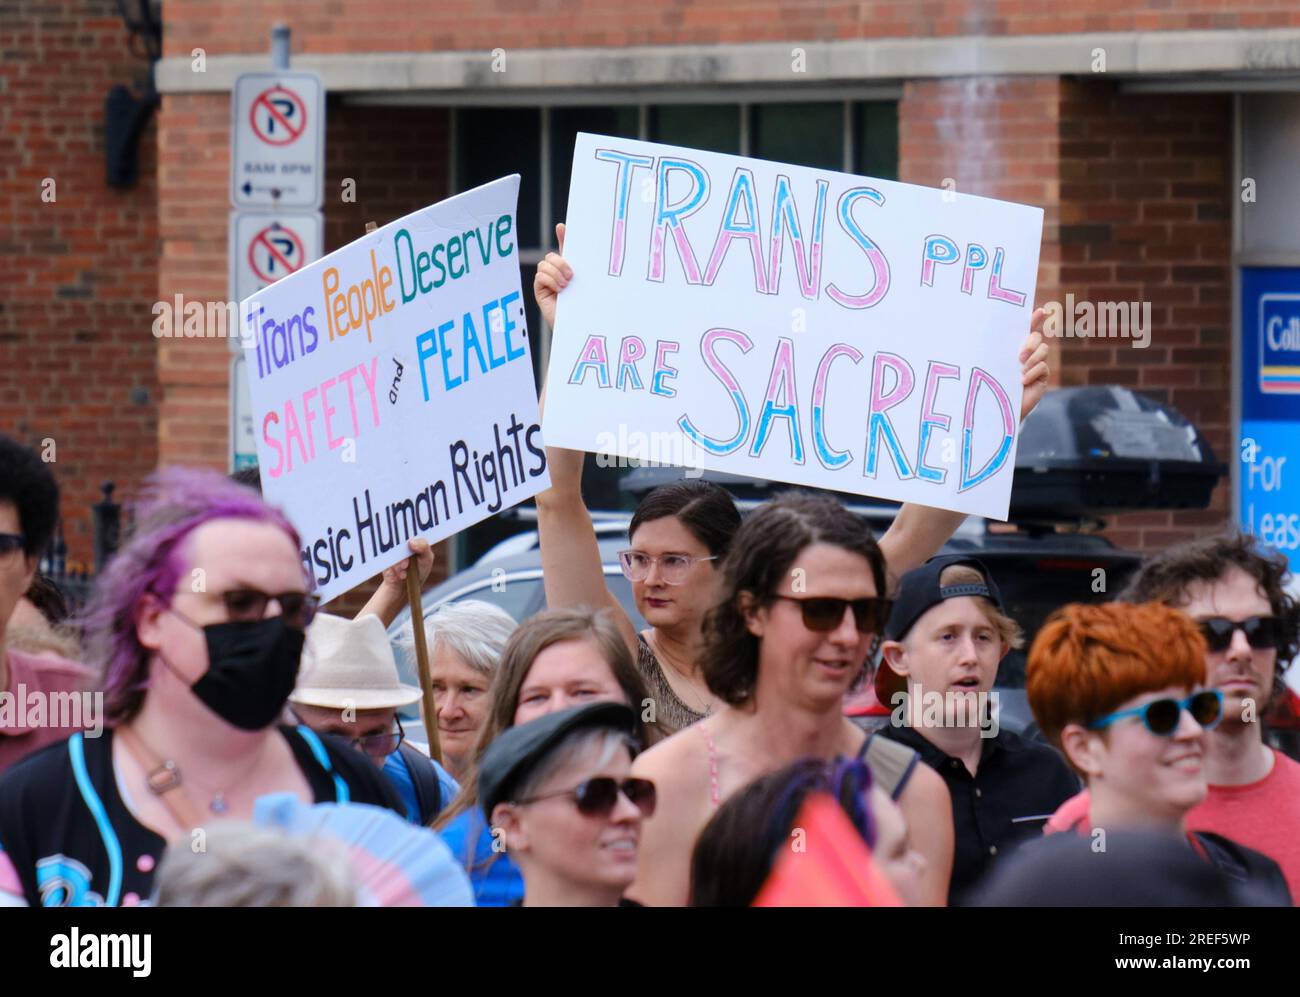 March for trans and Queer Justice - Sign Trans people are sacred Stock Photo